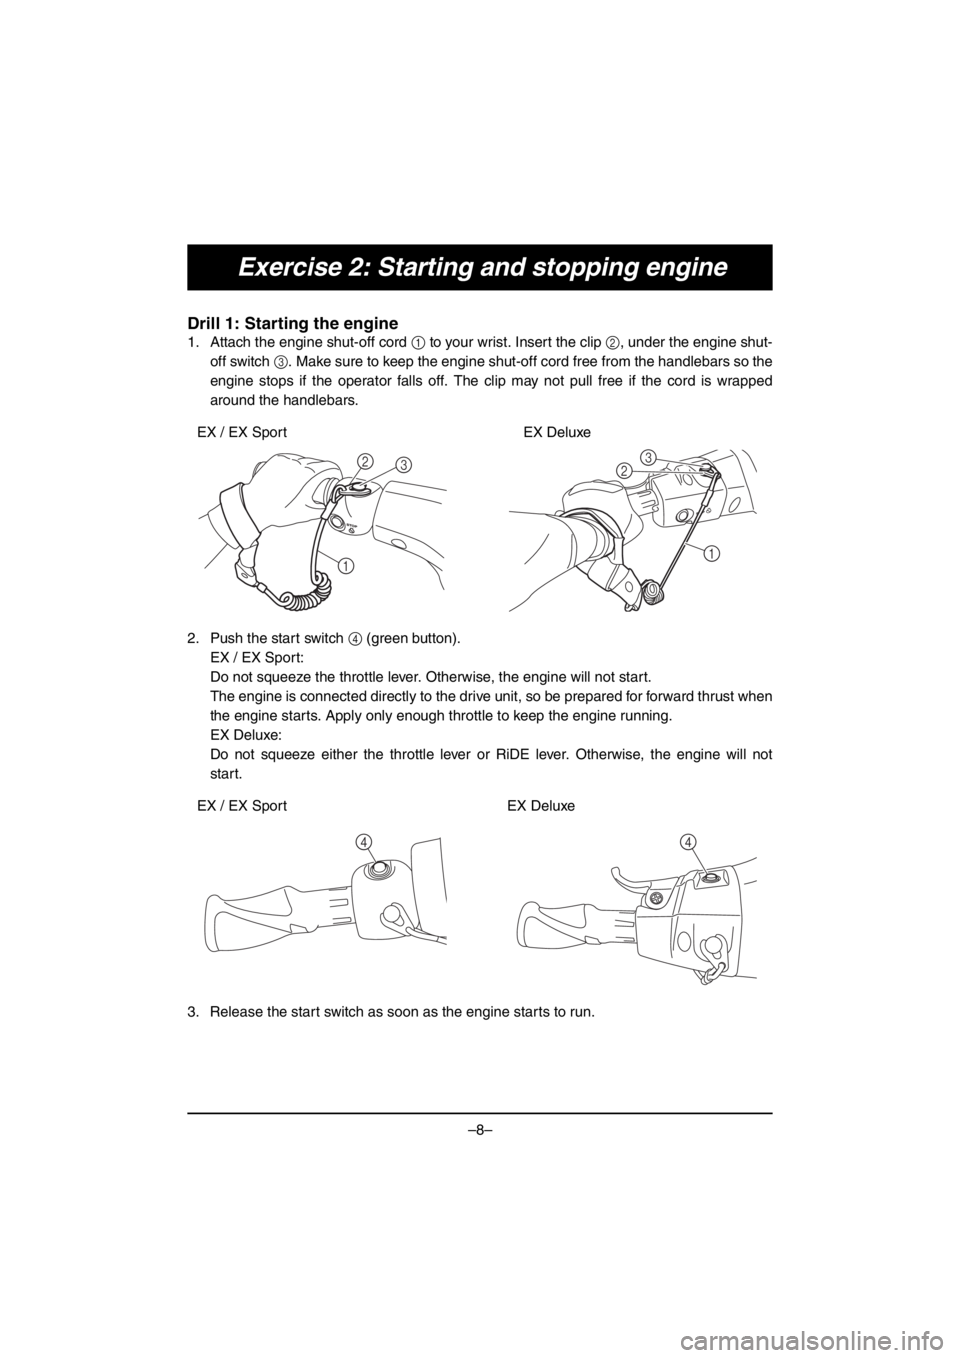 YAMAHA EX 2017  ΟΔΗΓΌΣ ΧΡΉΣΗΣ (in Greek) –8–
Exercise 2: Starting and stopping engine
Drill 1: Starting the engine
1. Attach the engine shut-off cord 1 to your wrist. Insert the clip 2, under the engine shut-
off switch 3. Make sure to k